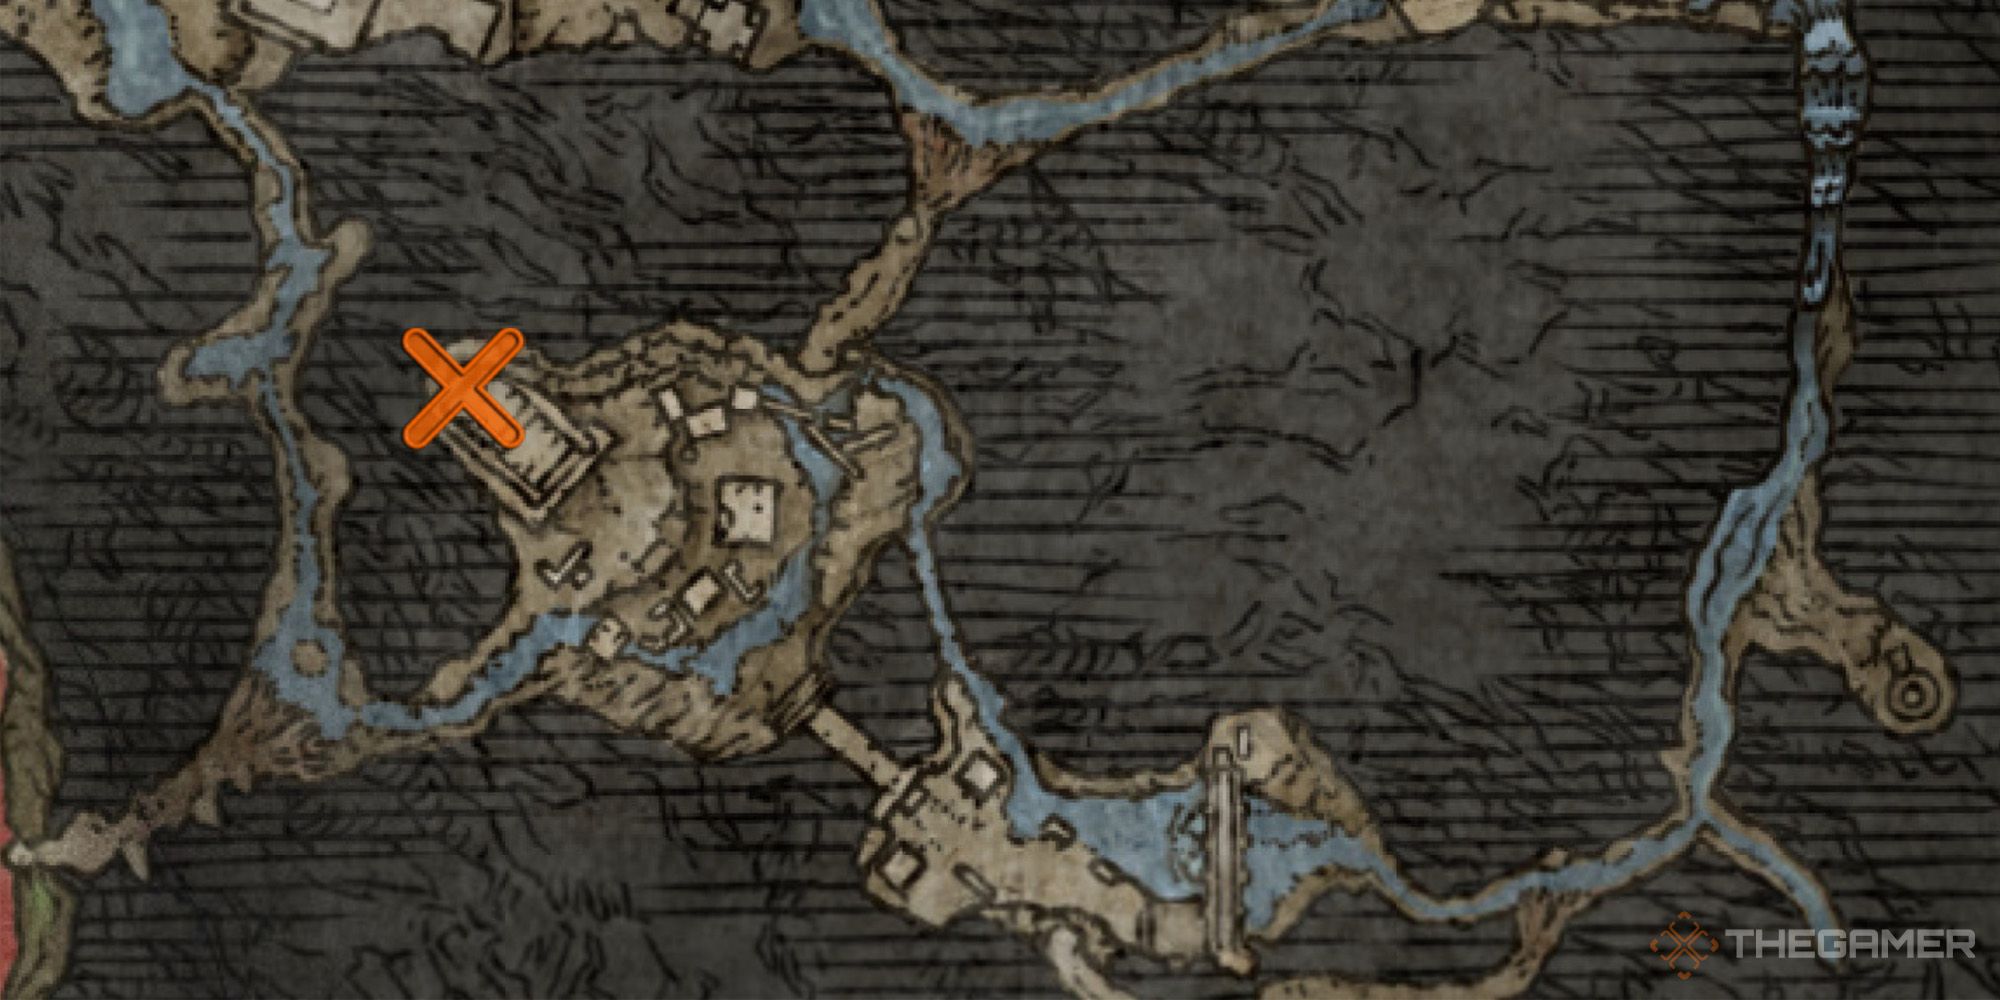 Elden Ring Map showing the location of Perfumer's Cookbook [4]